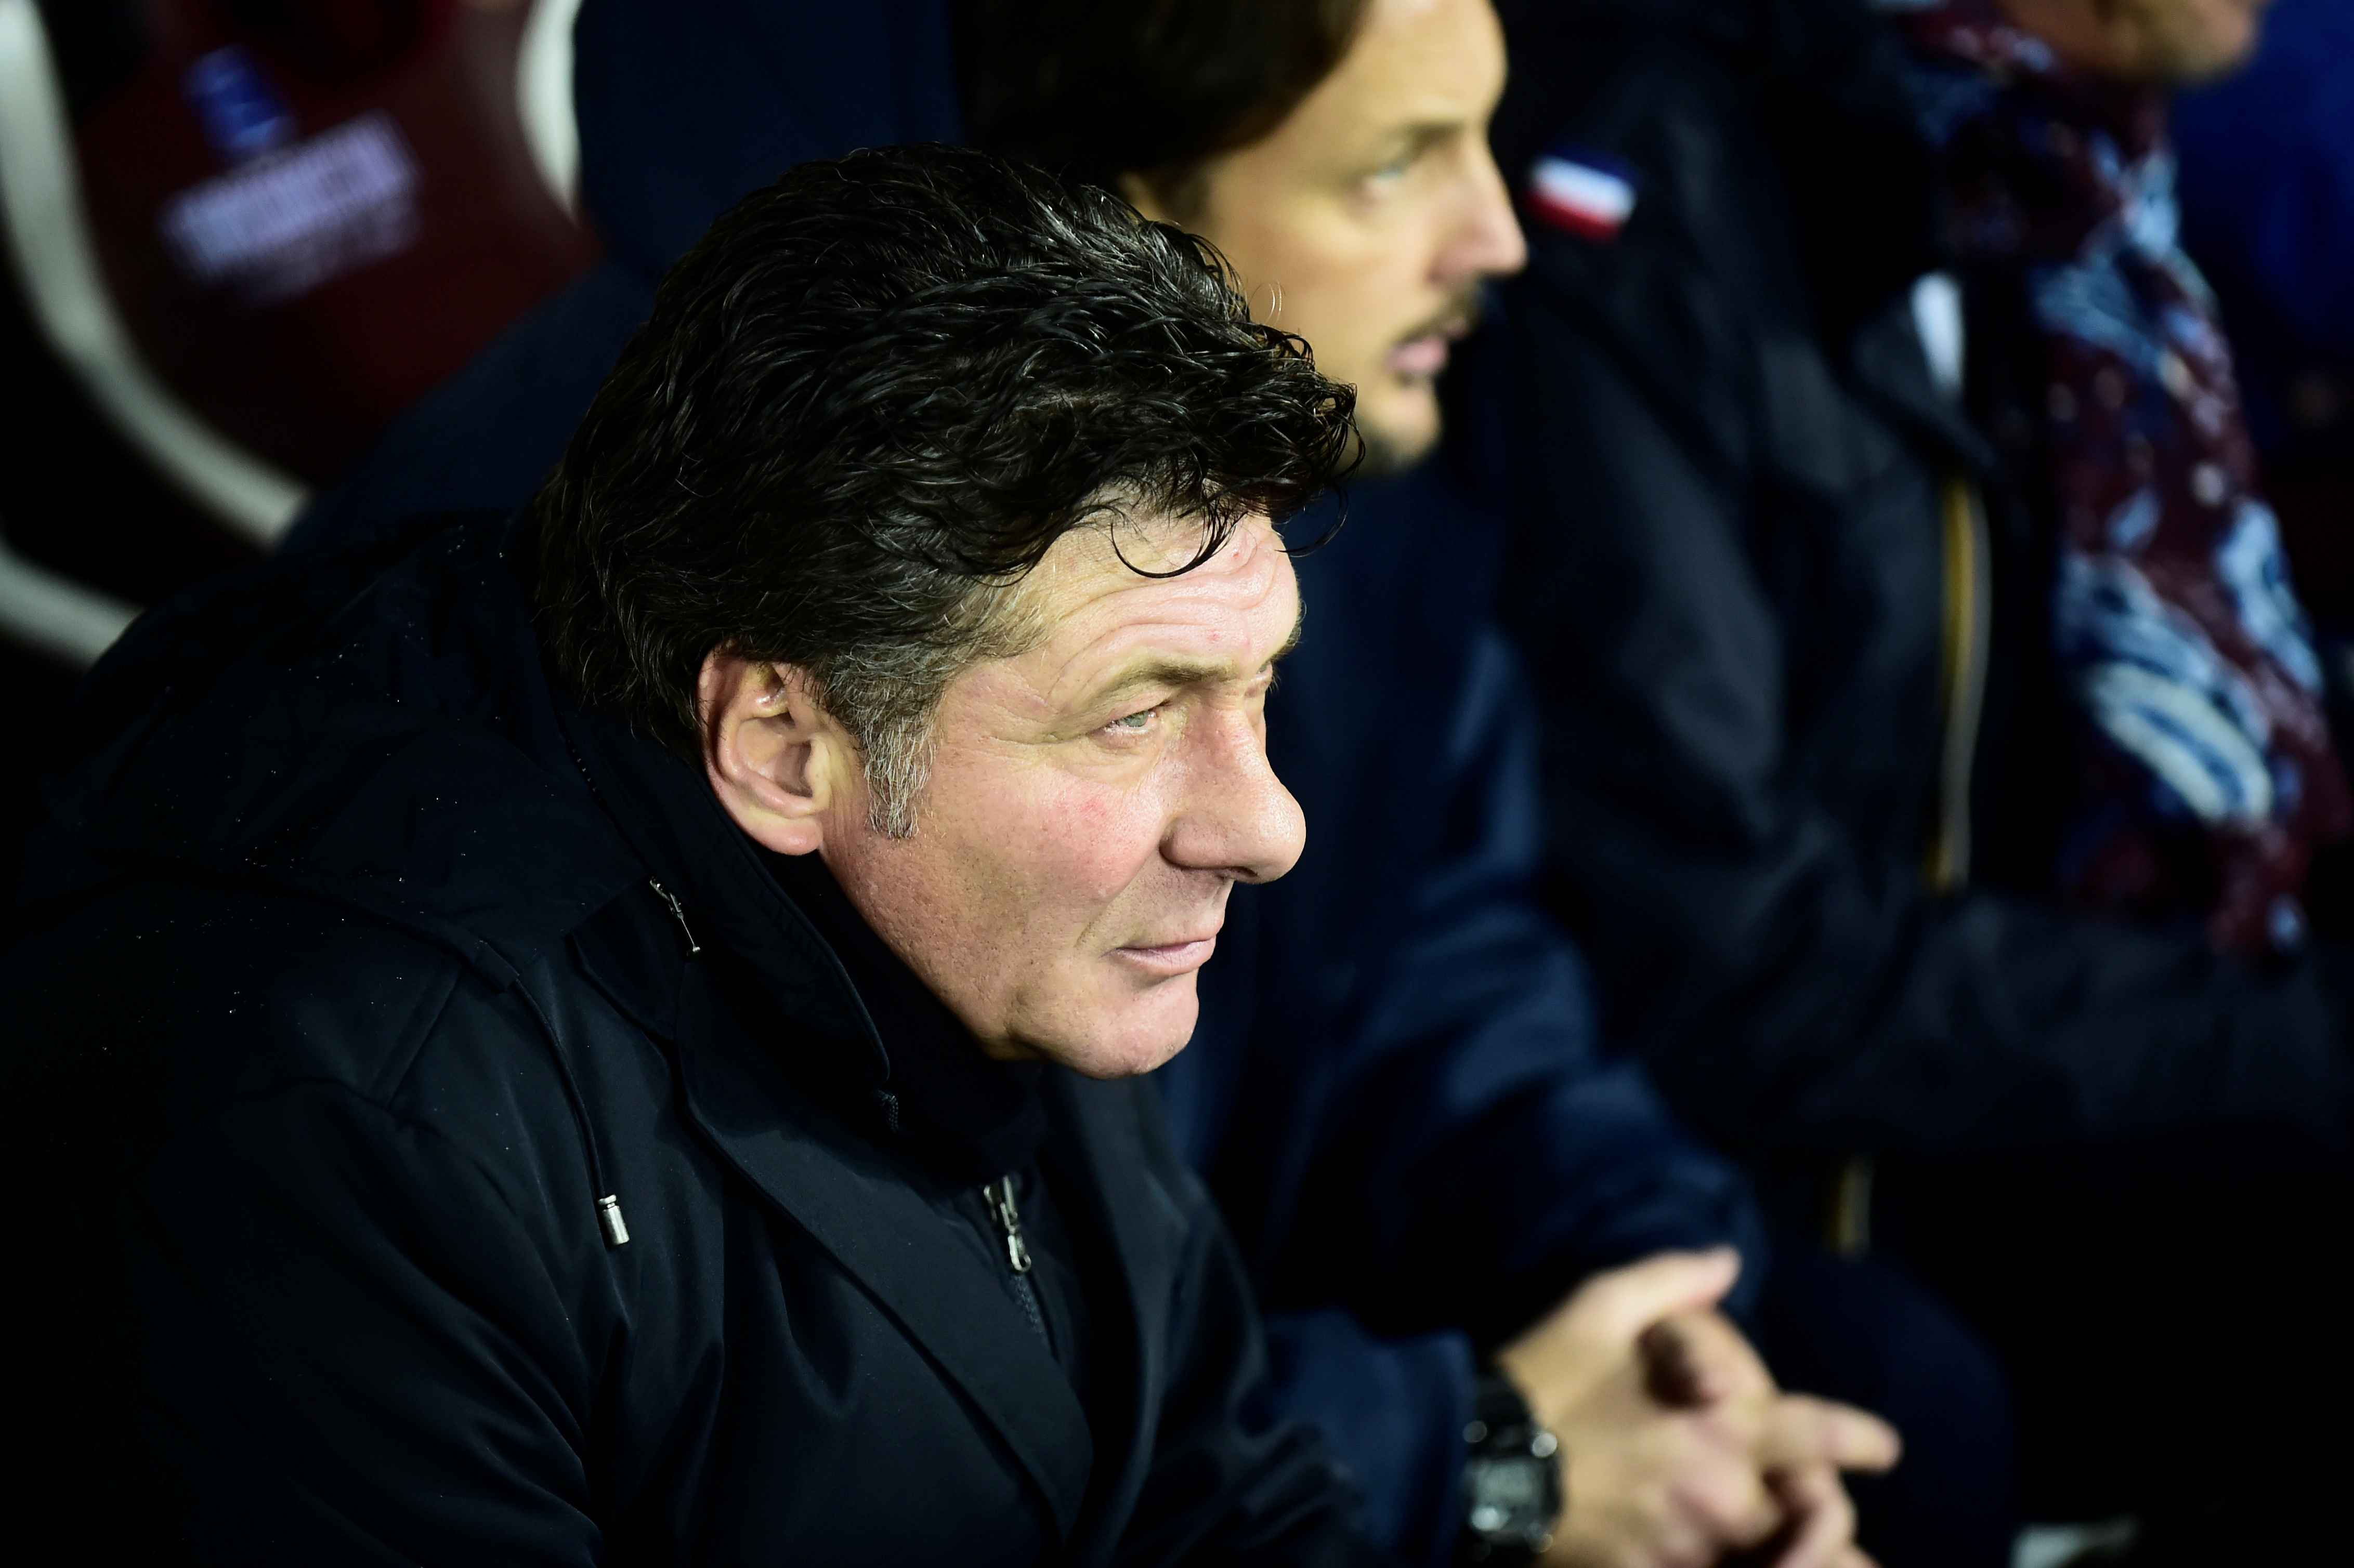 Walter Mazzarri accepts six-month deal from Napoli - Get Italian